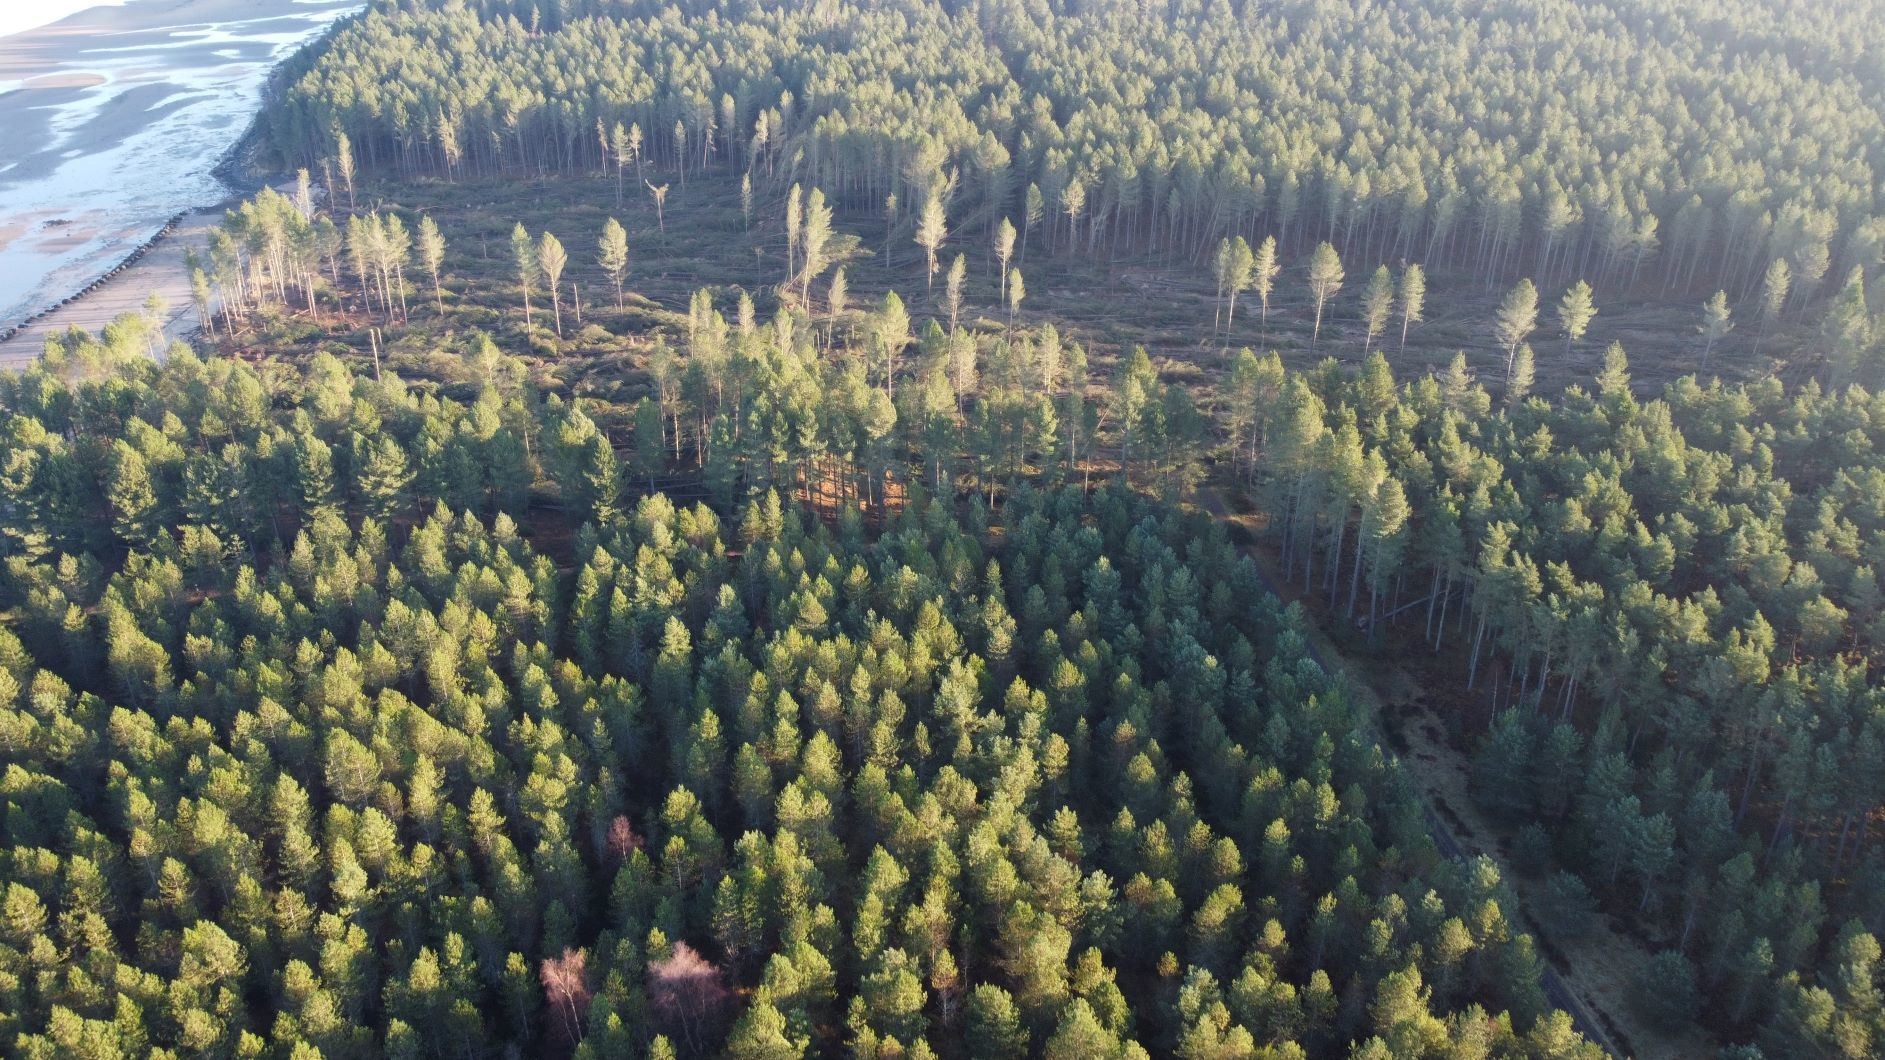 Adaptive techniques include planting a greater mix of tree species and planting trees at different stages of a forest's development to help dissipate wind gusts.